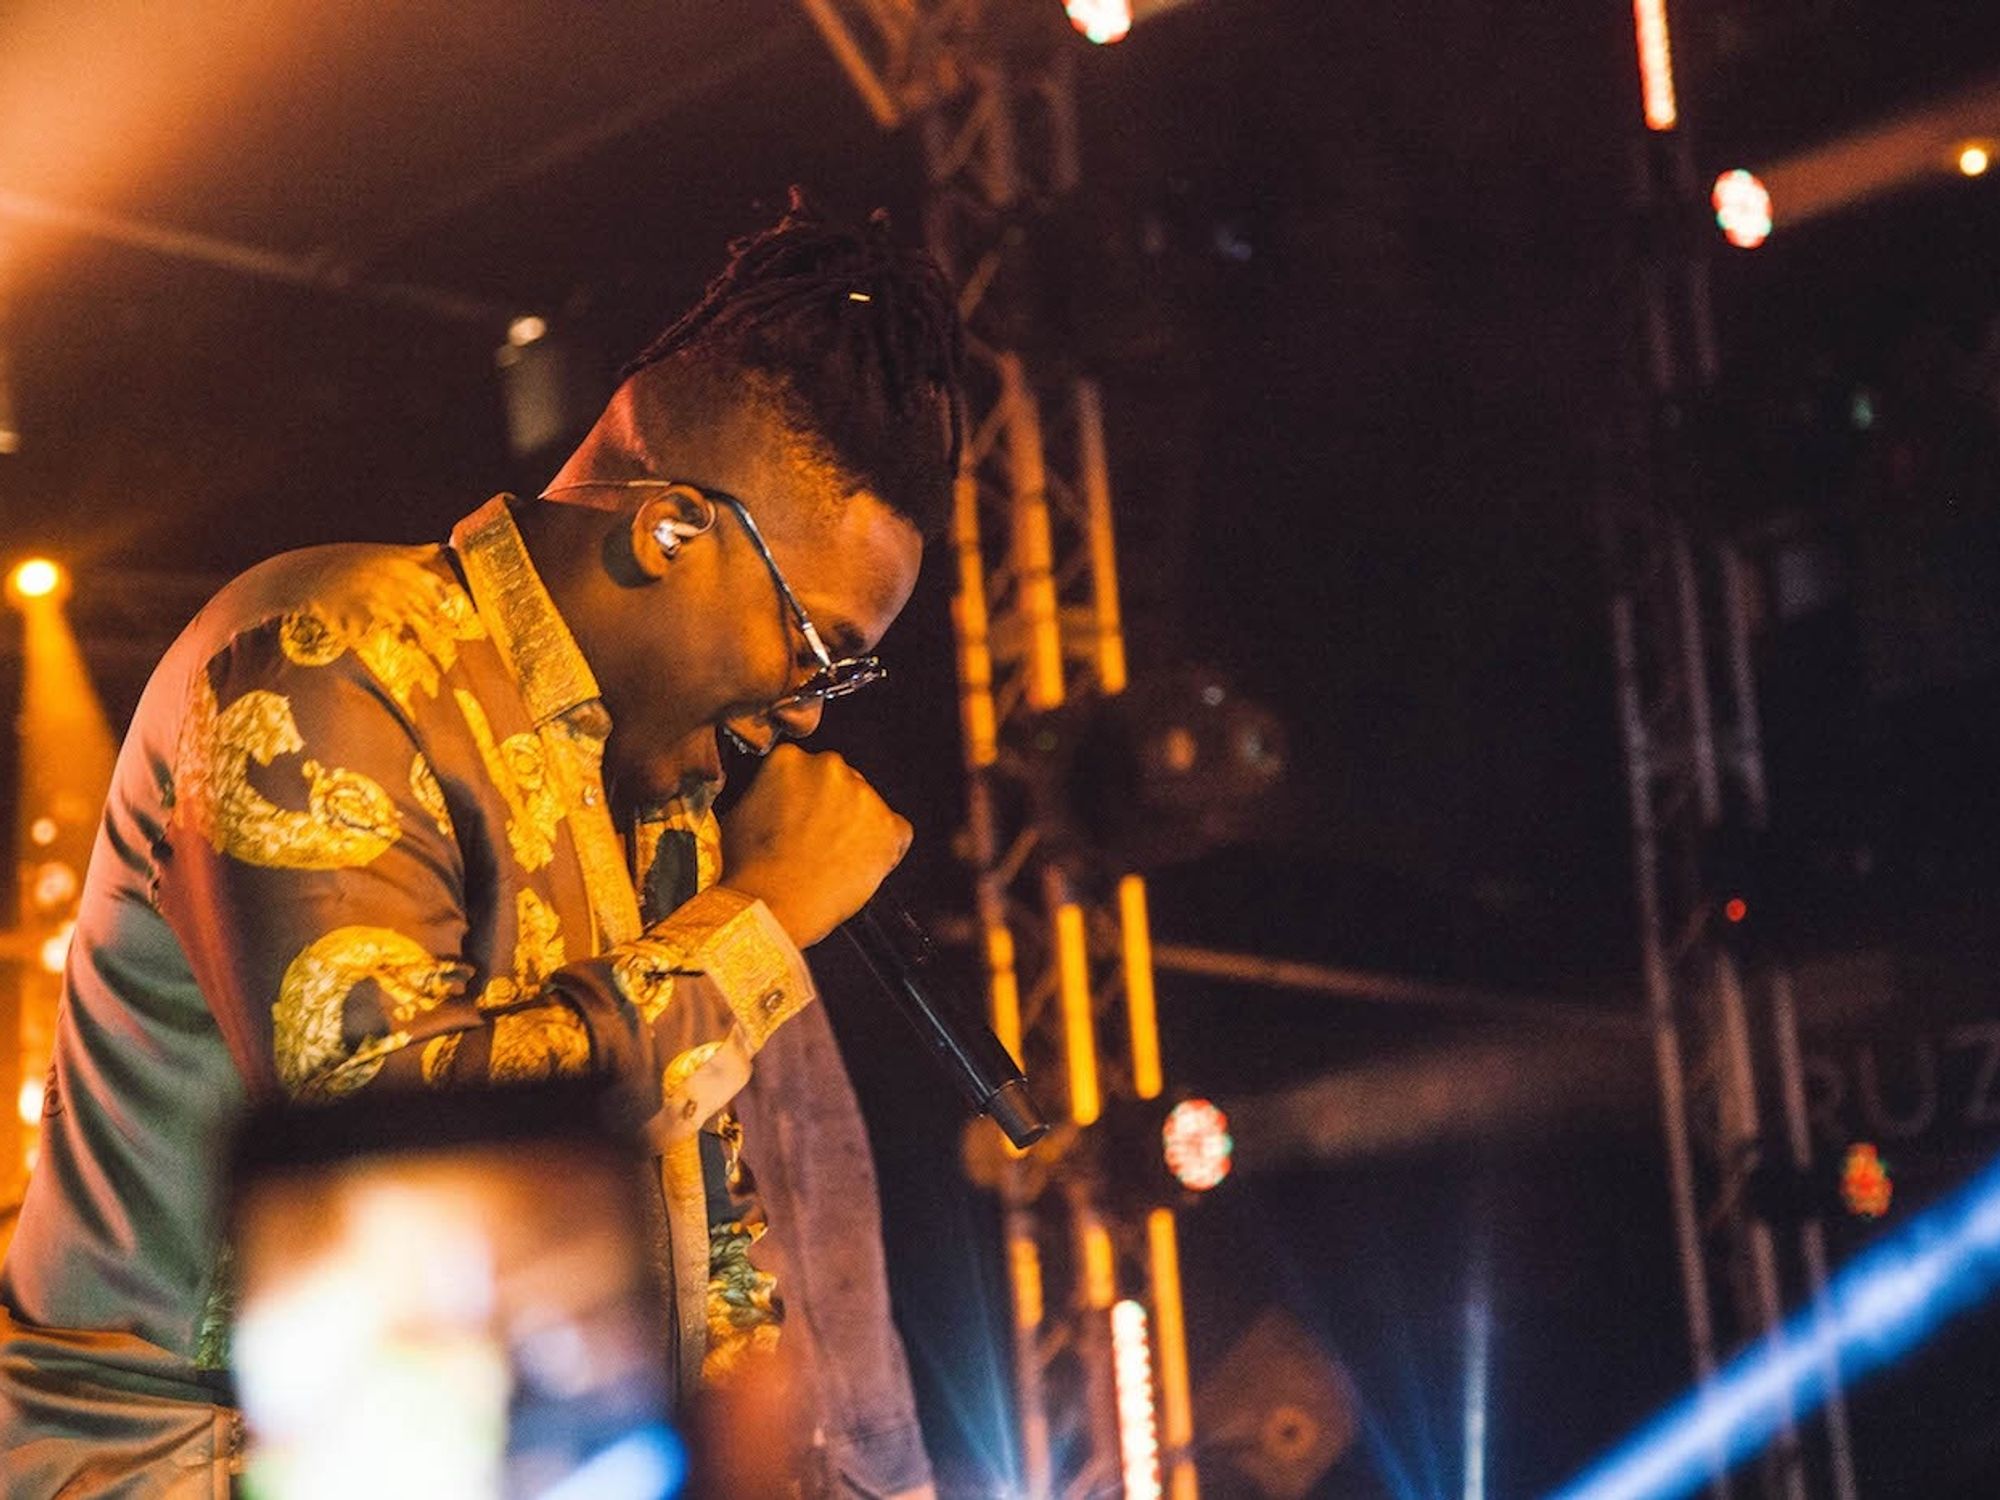 Kiddominant performs at the launch of AKA's "Touch My Blood" album in Soweto, South Africa in 2017.